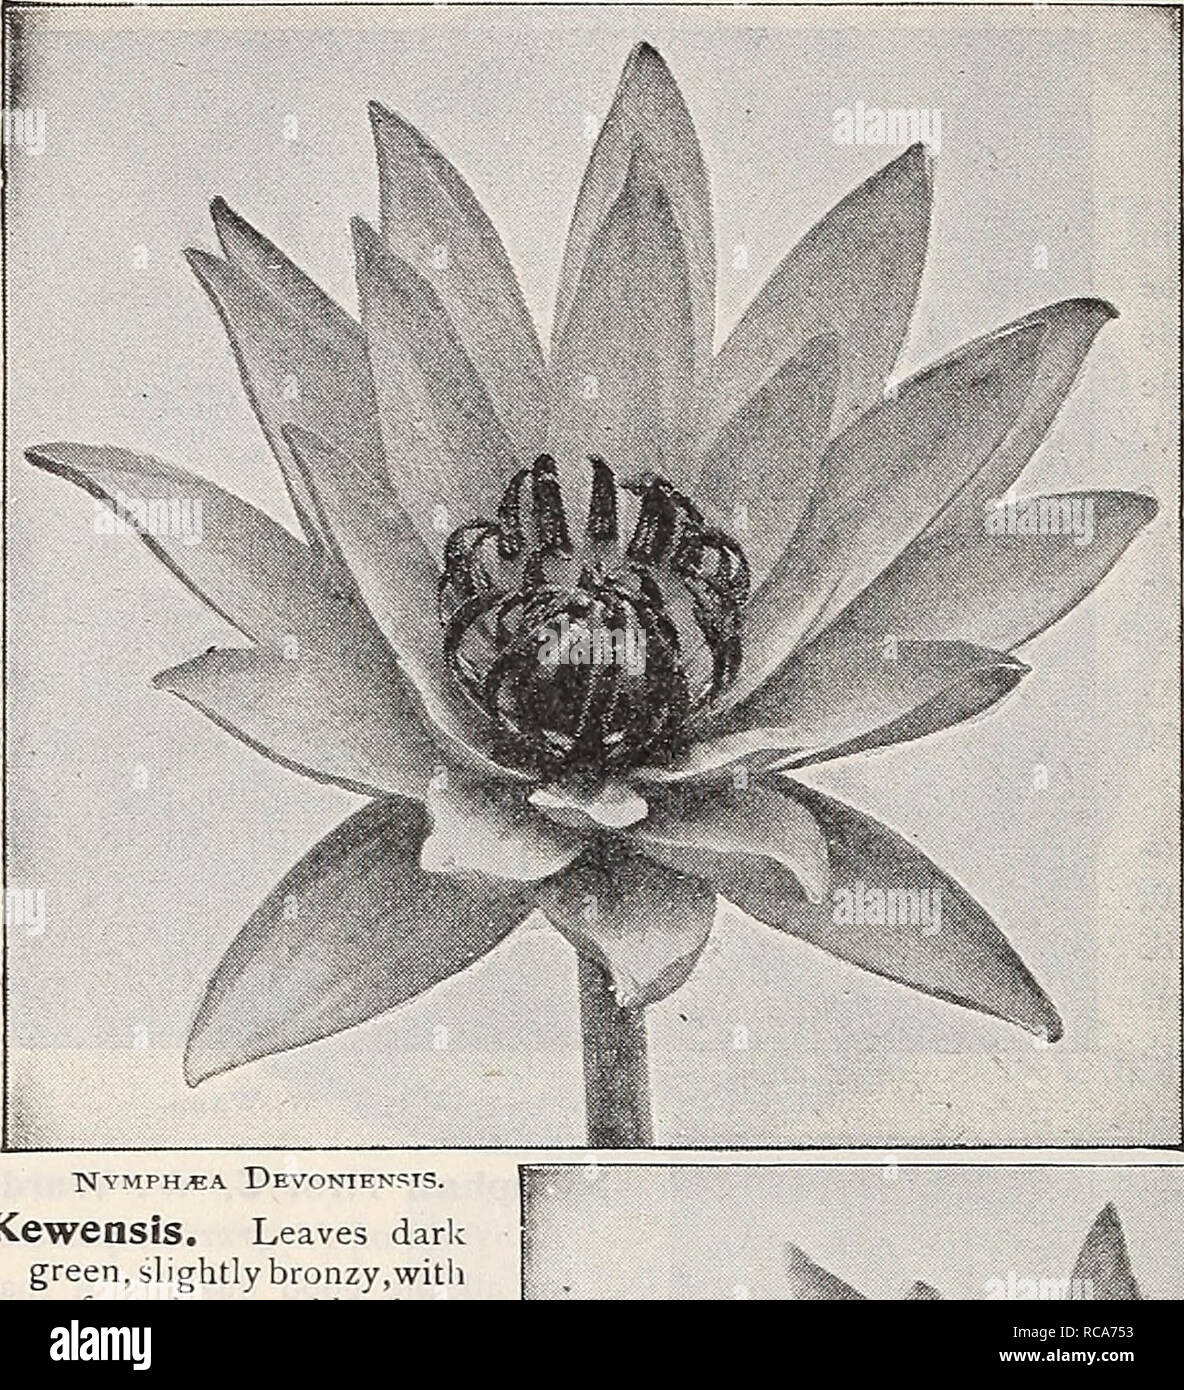 . Dreer's garden book : 1906. Seeds Catalogs; Nursery stock Catalogs; Gardening Equipment and supplies Catalogs; Flowers Seeds Catalogs; Vegetables Seeds Catalogs; Fruit Seeds Catalogs. 120 HENRTADREER-PHILADELPHIA- WATER LiLlK«» AQUATICS'. &quot;NVMPH.CA DeVON1EN?T5. Kewensis. Leaves dark green, slightly bronzy,with a few brown blotches; young leaves more spotted on surface. Light pink flowers 6 to 8 inches J. icross. SL50 each. yj Lotus (M tkeymalis D.C.). The White Lotus, leaves dark, glossy green, 12 to 20 inches in diameter. Flowers white, the broid outer petals suffused pink ; petals con Stock Photo